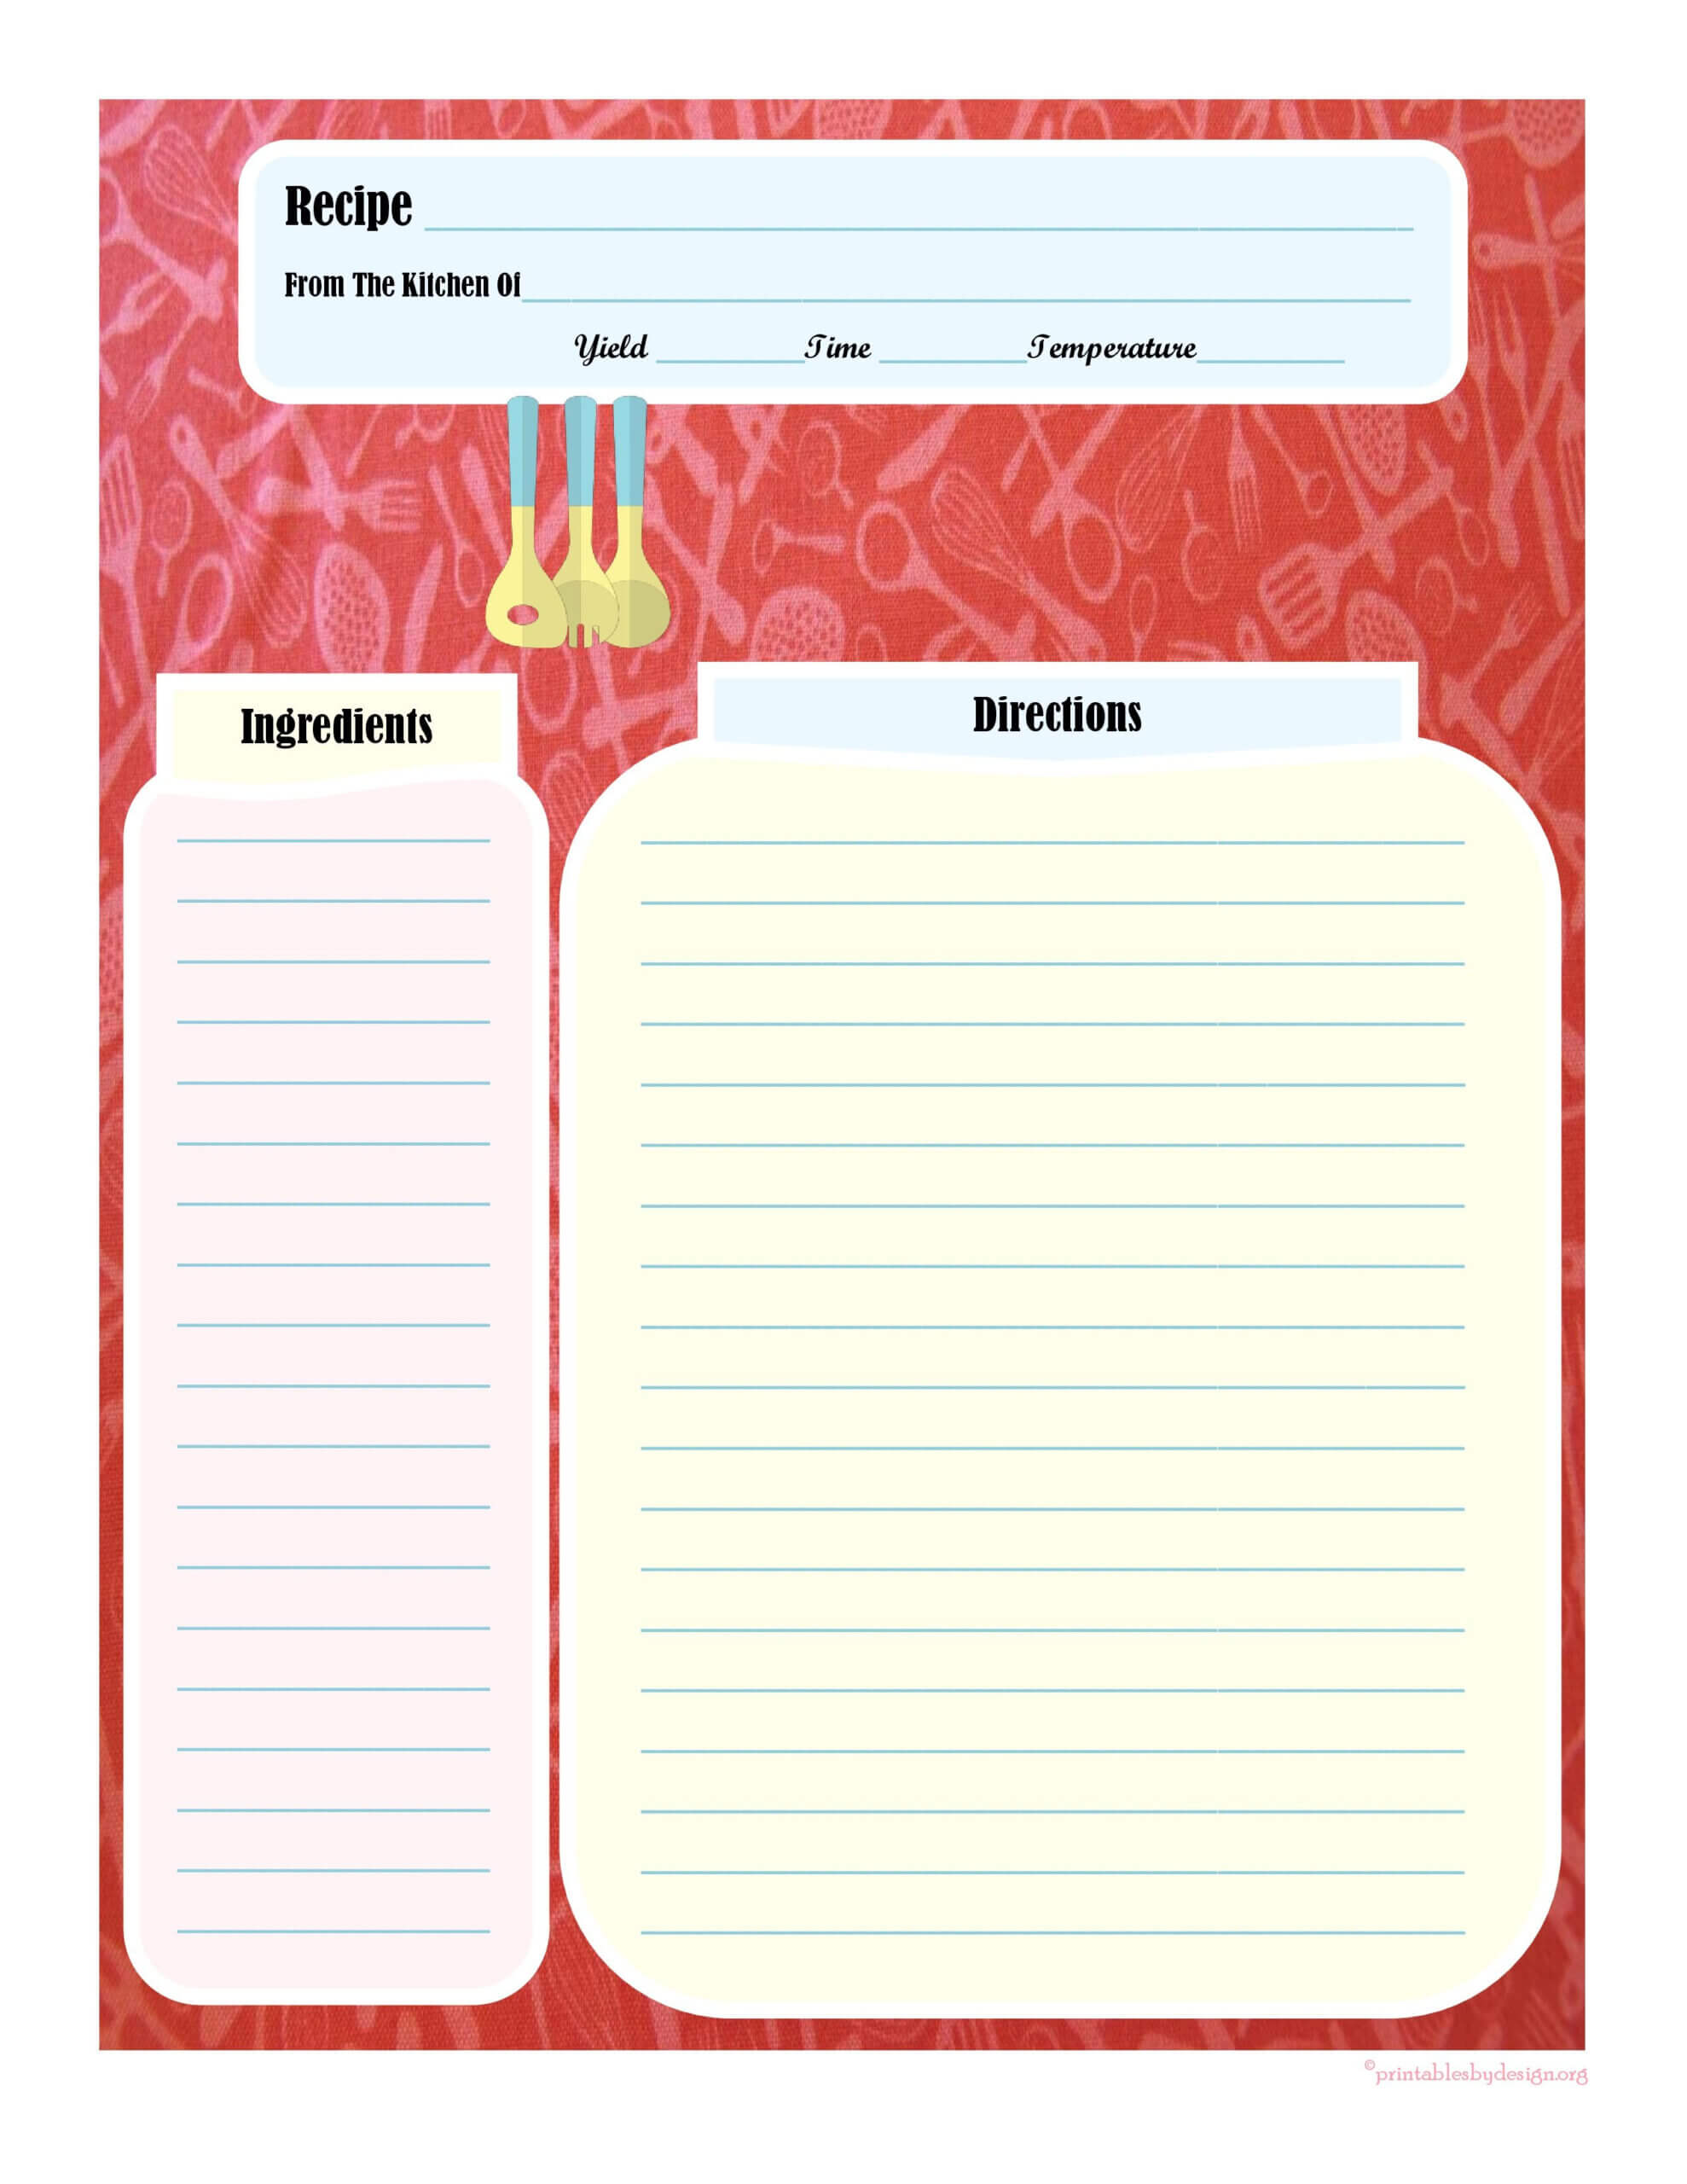 Full Page Recipe Card | Printable Recipe Cards, Family Throughout Full Page Recipe Template For Word